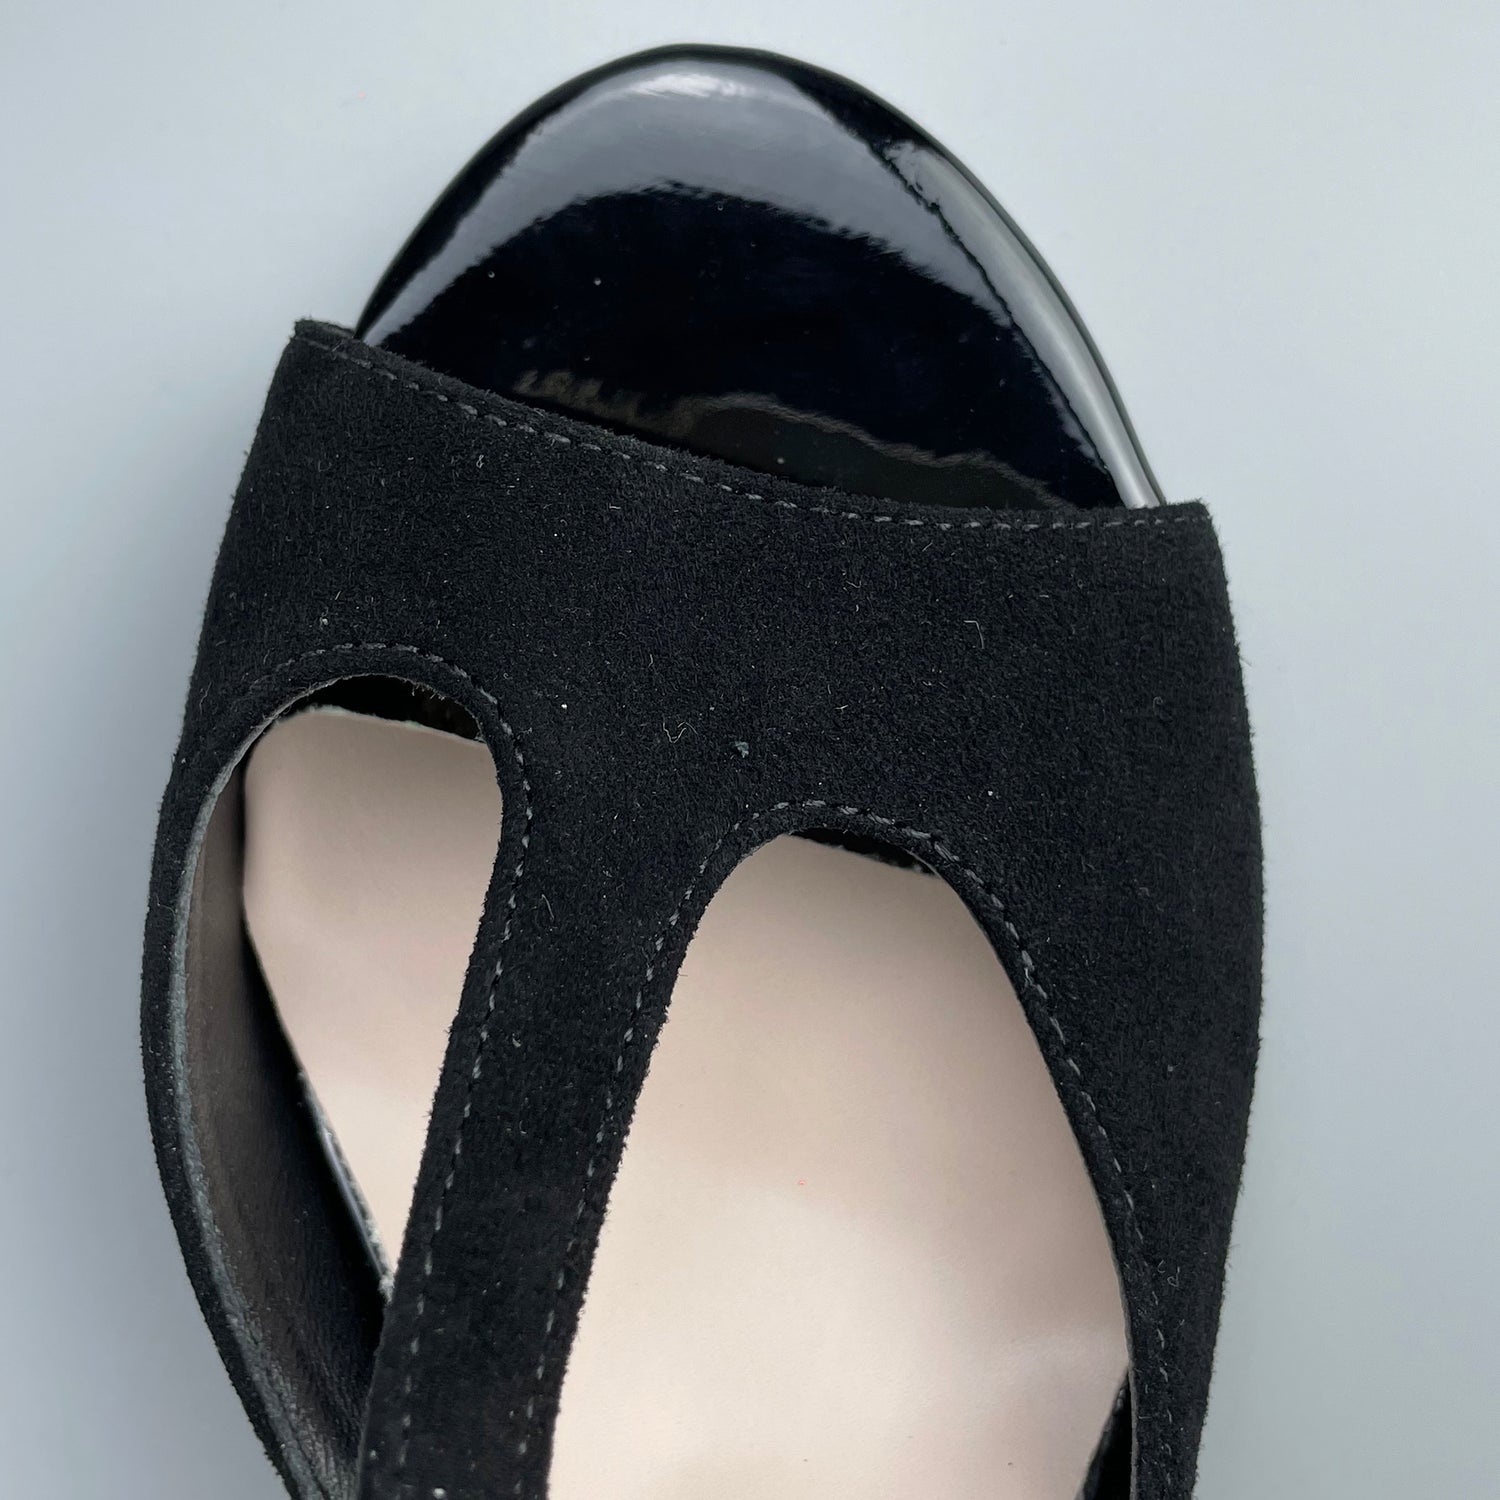 Pro Dancer open-toe and open-back Argentine Tango shoes with high salsa heels and hard leather sole sandals in black (PD-9046A)2